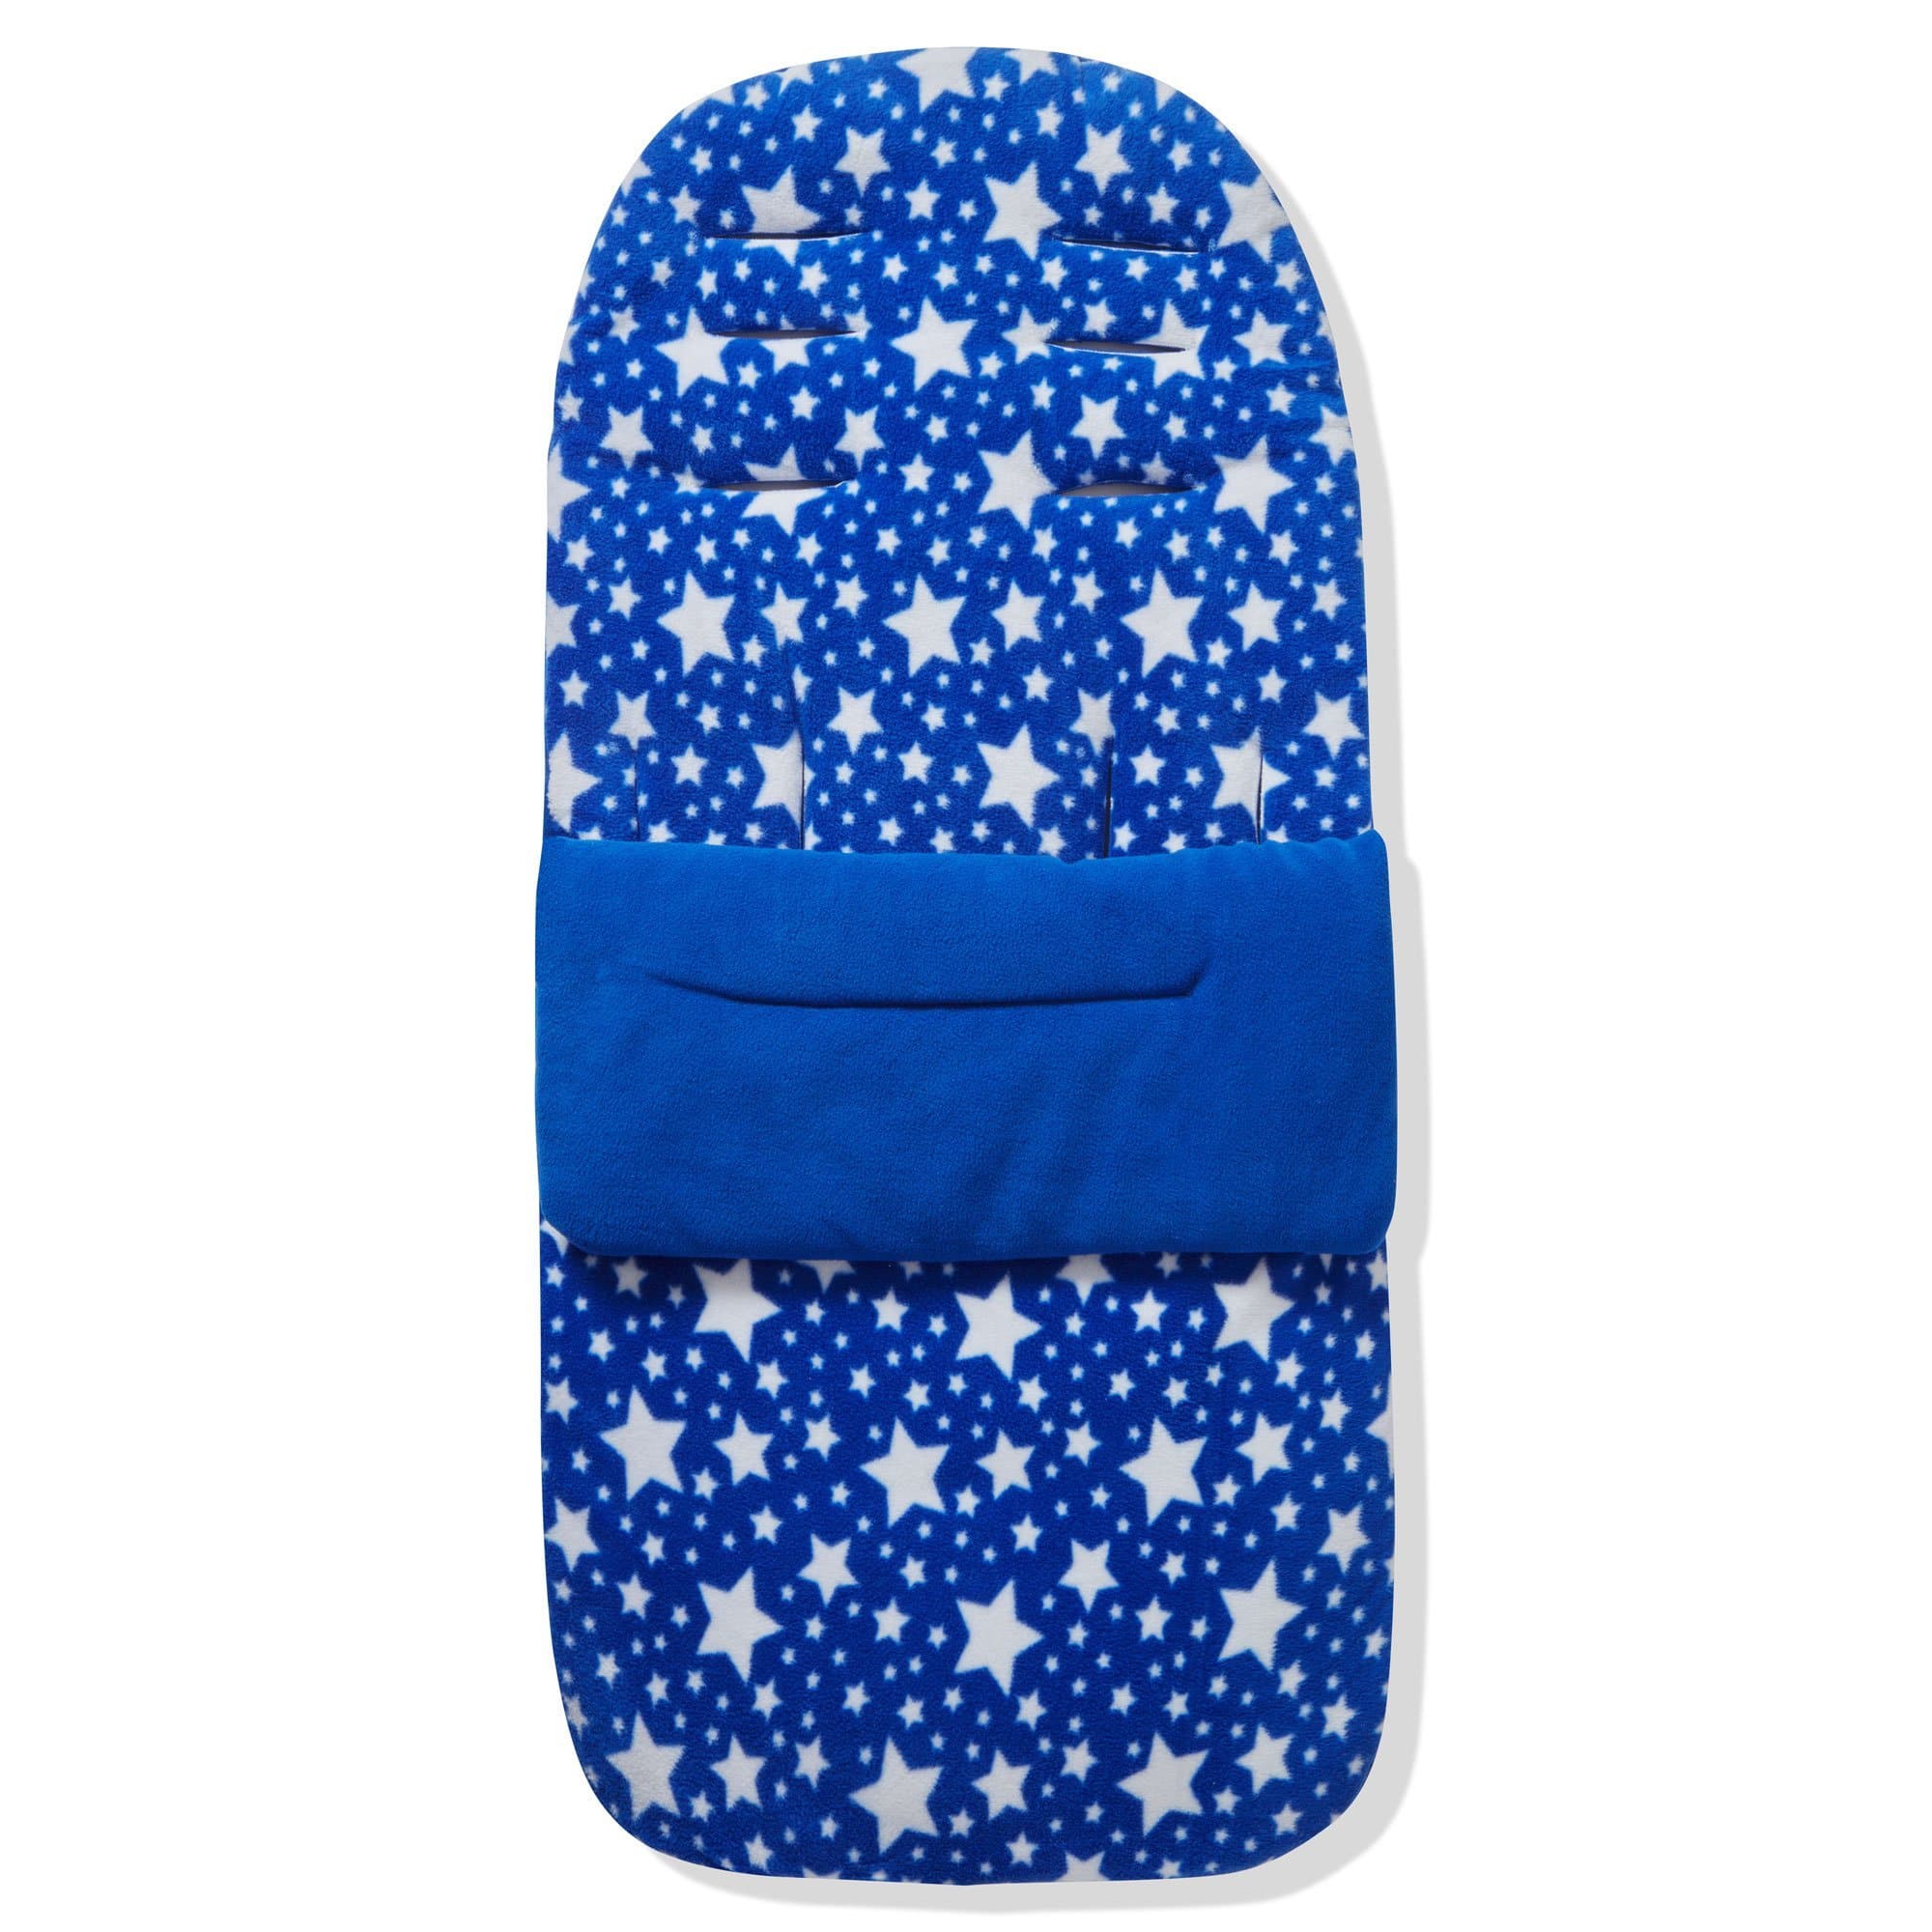 Fleece Footmuff / Cosy Toes Compatible with Firstwheels - For Your Little One